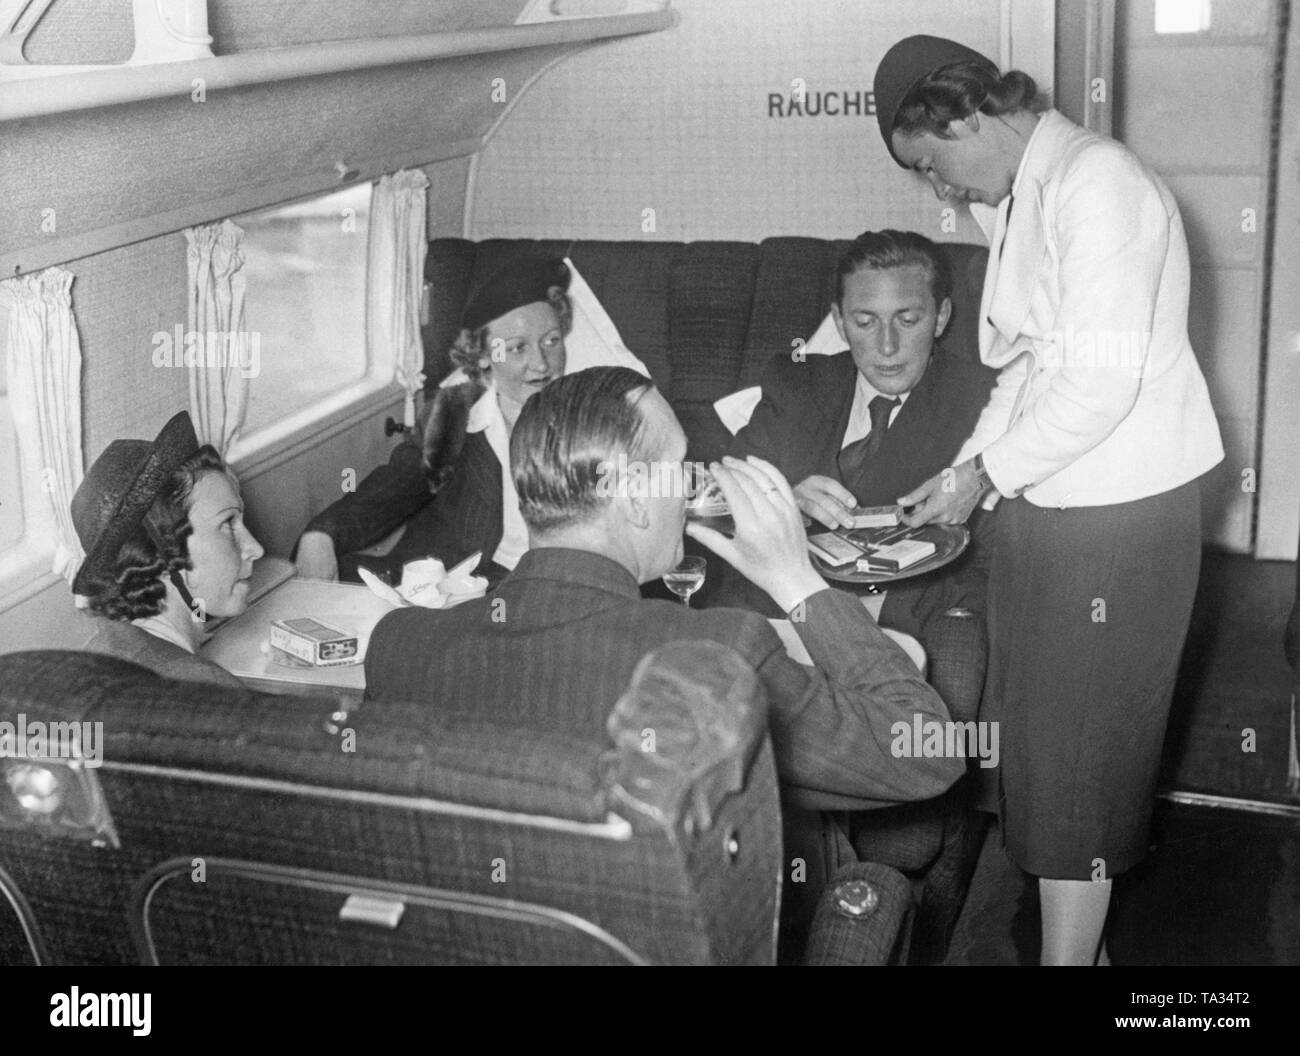 Passengers in the smoking compartment of a Focke-Wulf FW 200 'Condor' of the Deutsche Lufthansa. The aircraft was registered D-AETA, and its given name is 'Westfalen'. Stock Photo